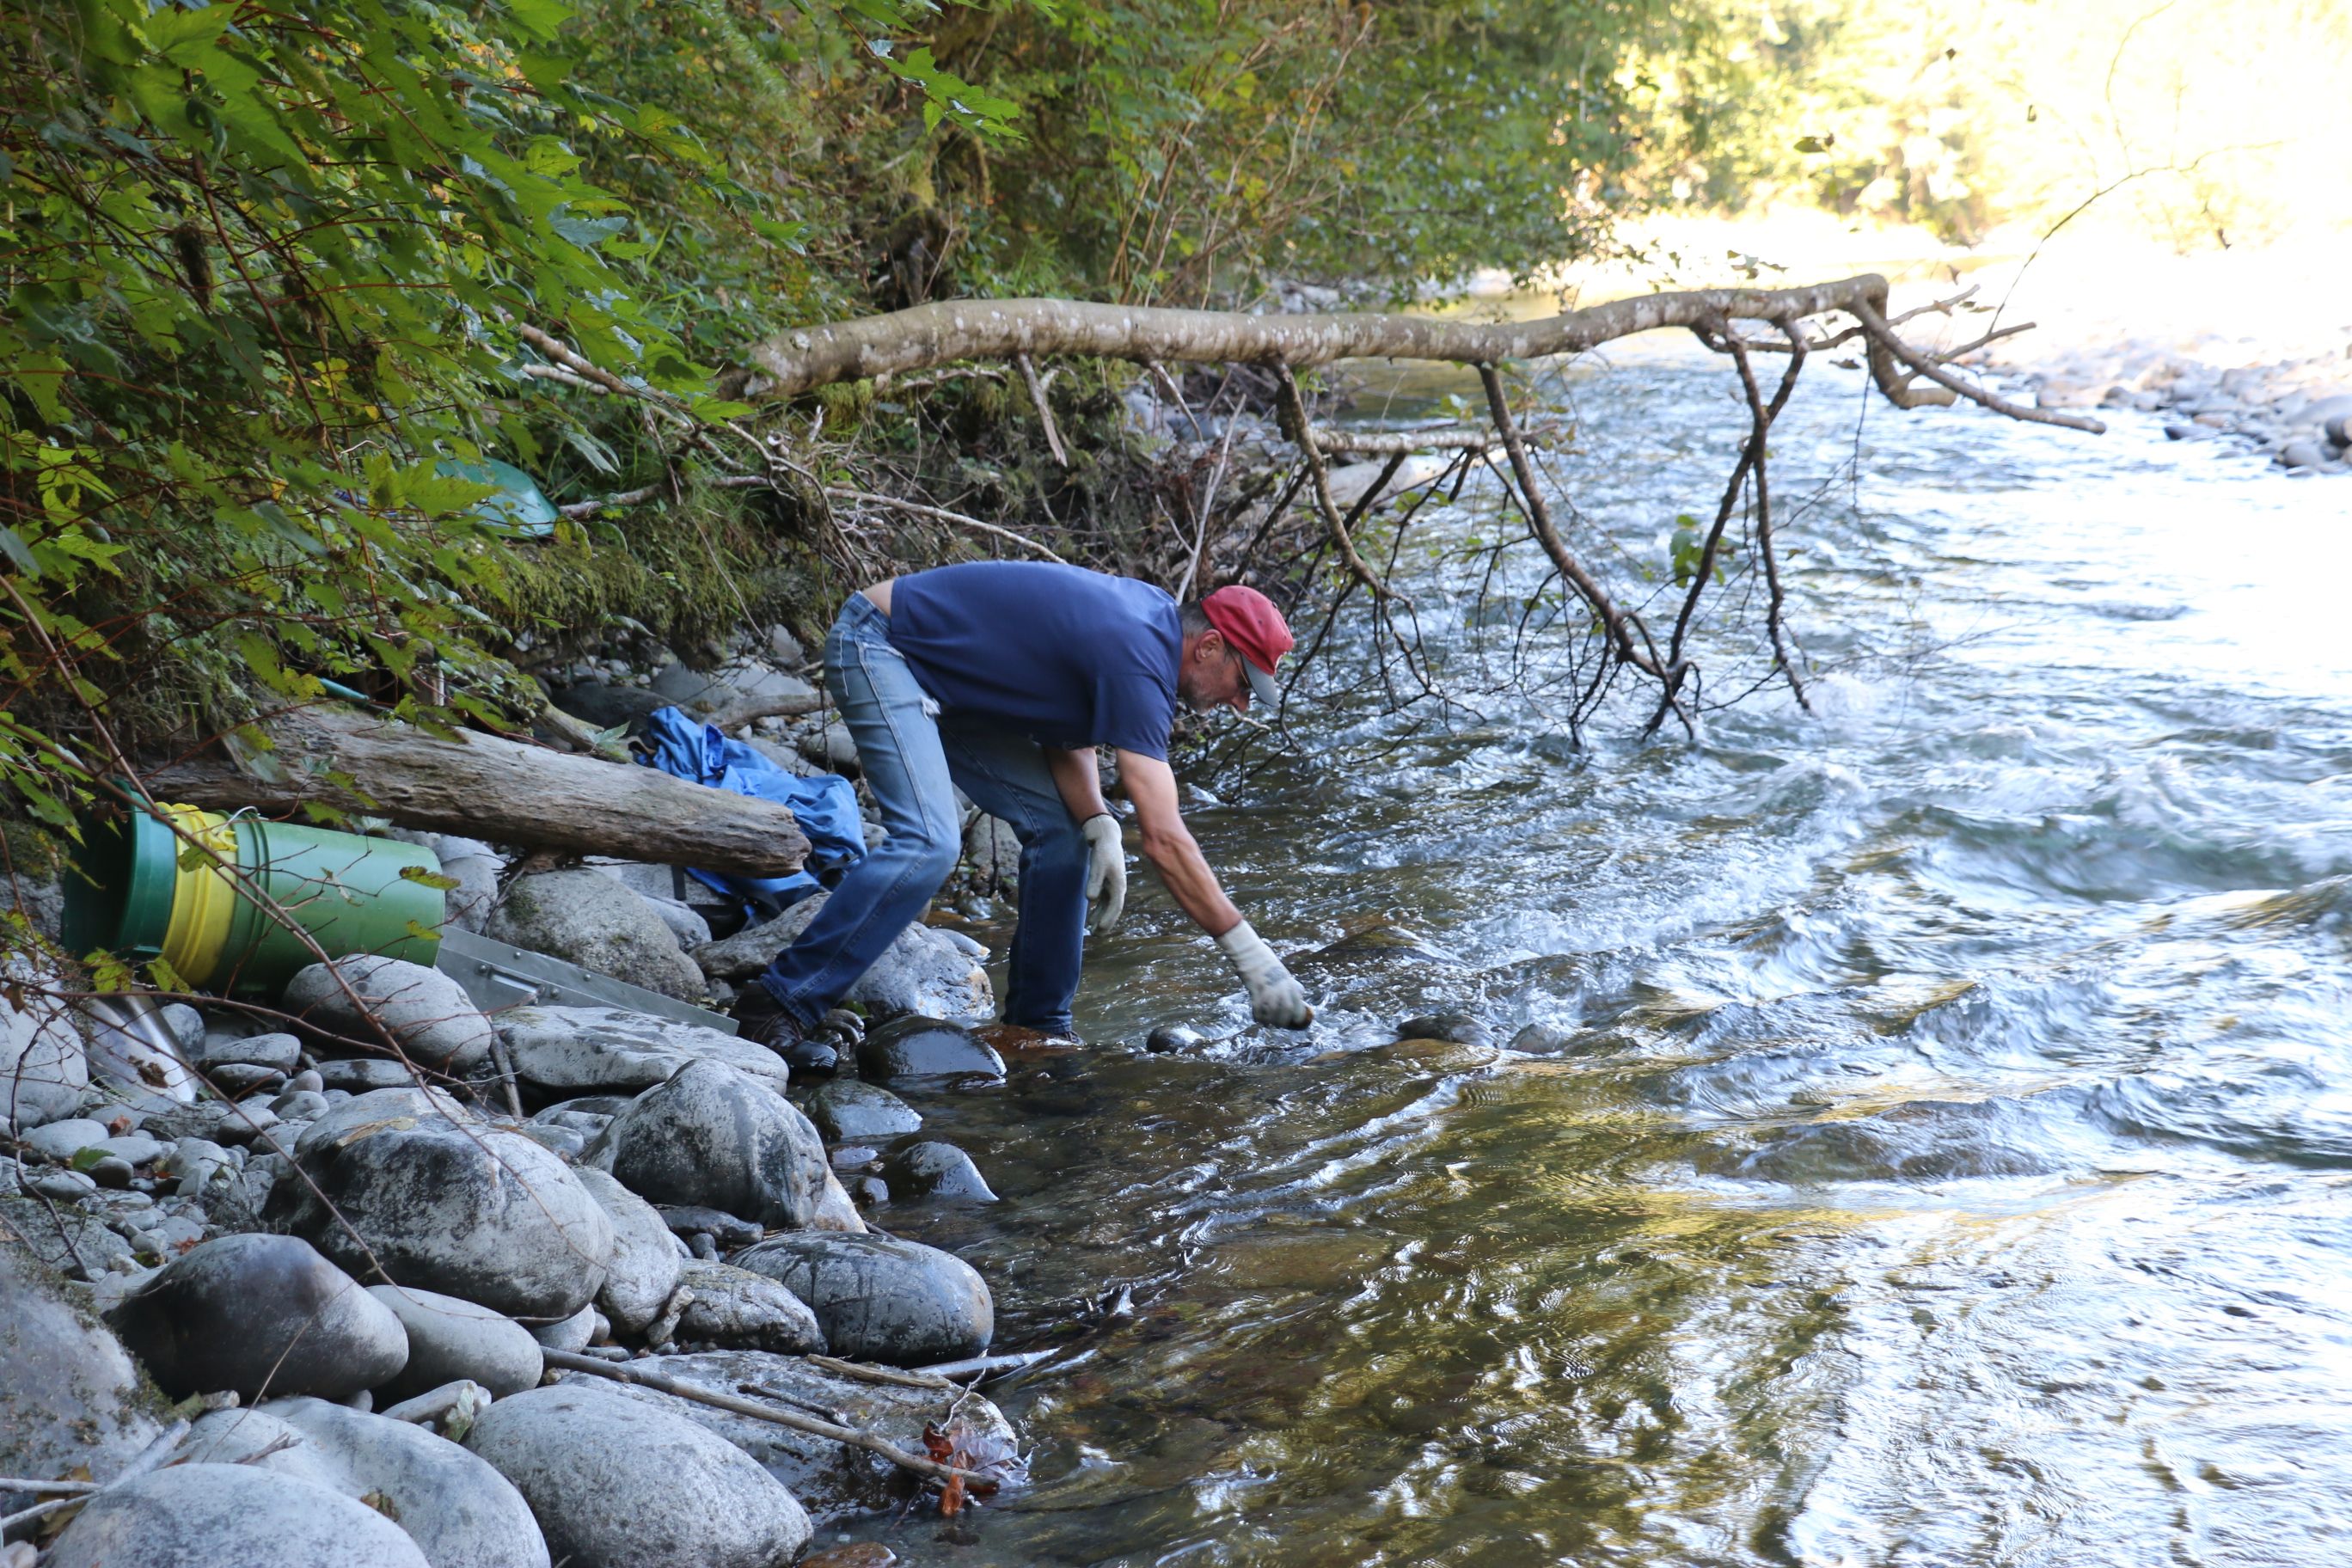 My buddy building a spot to place his sluice box.